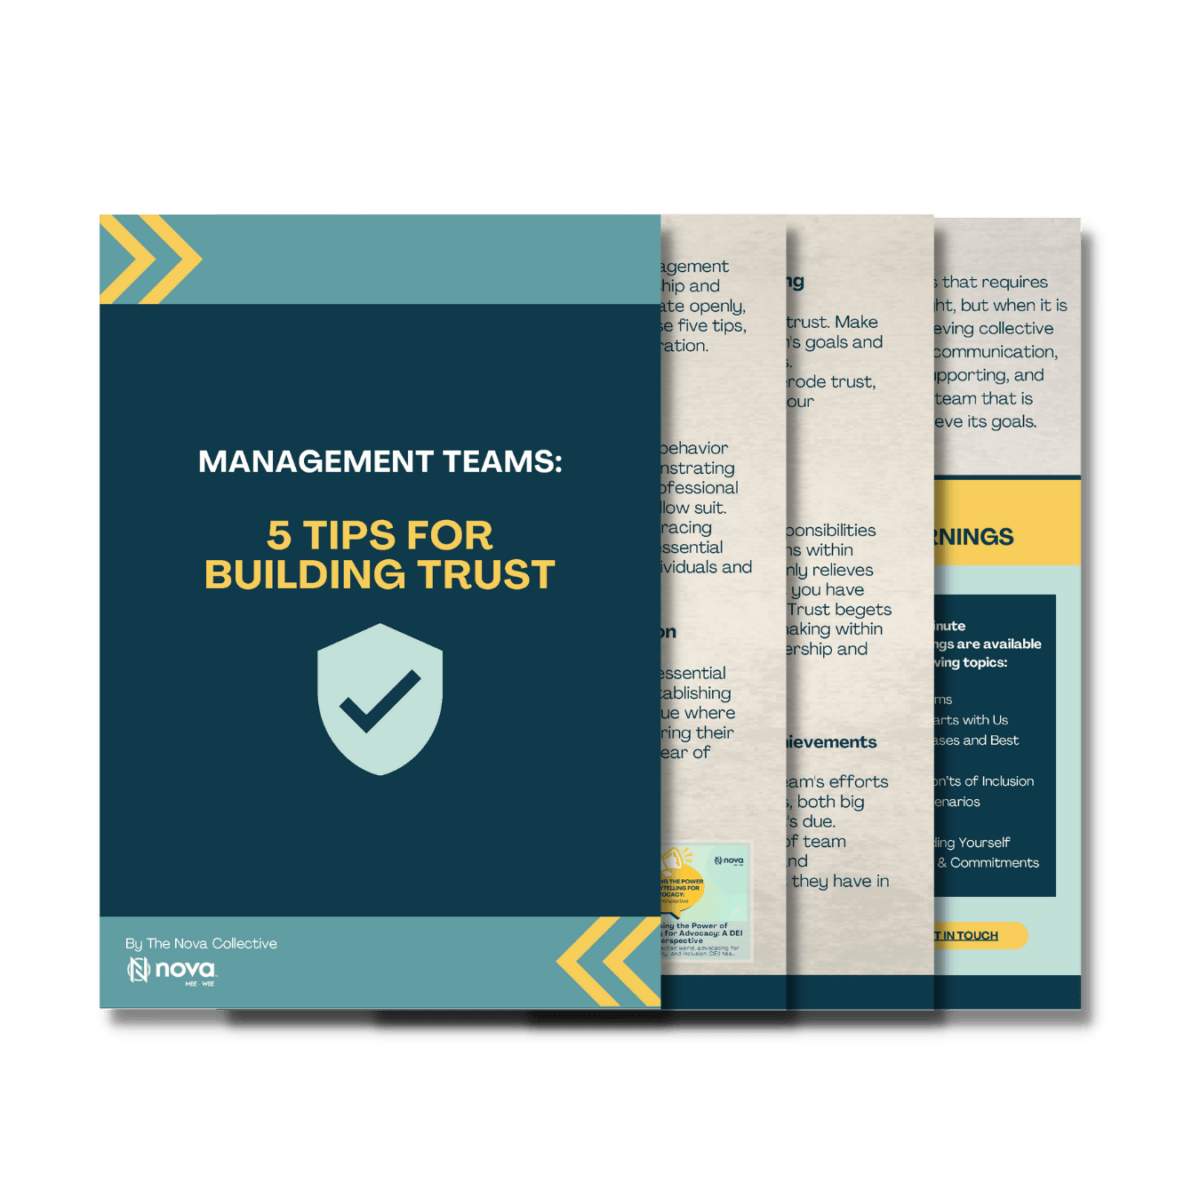 Graphics 5 Tips for Building Trust (2)